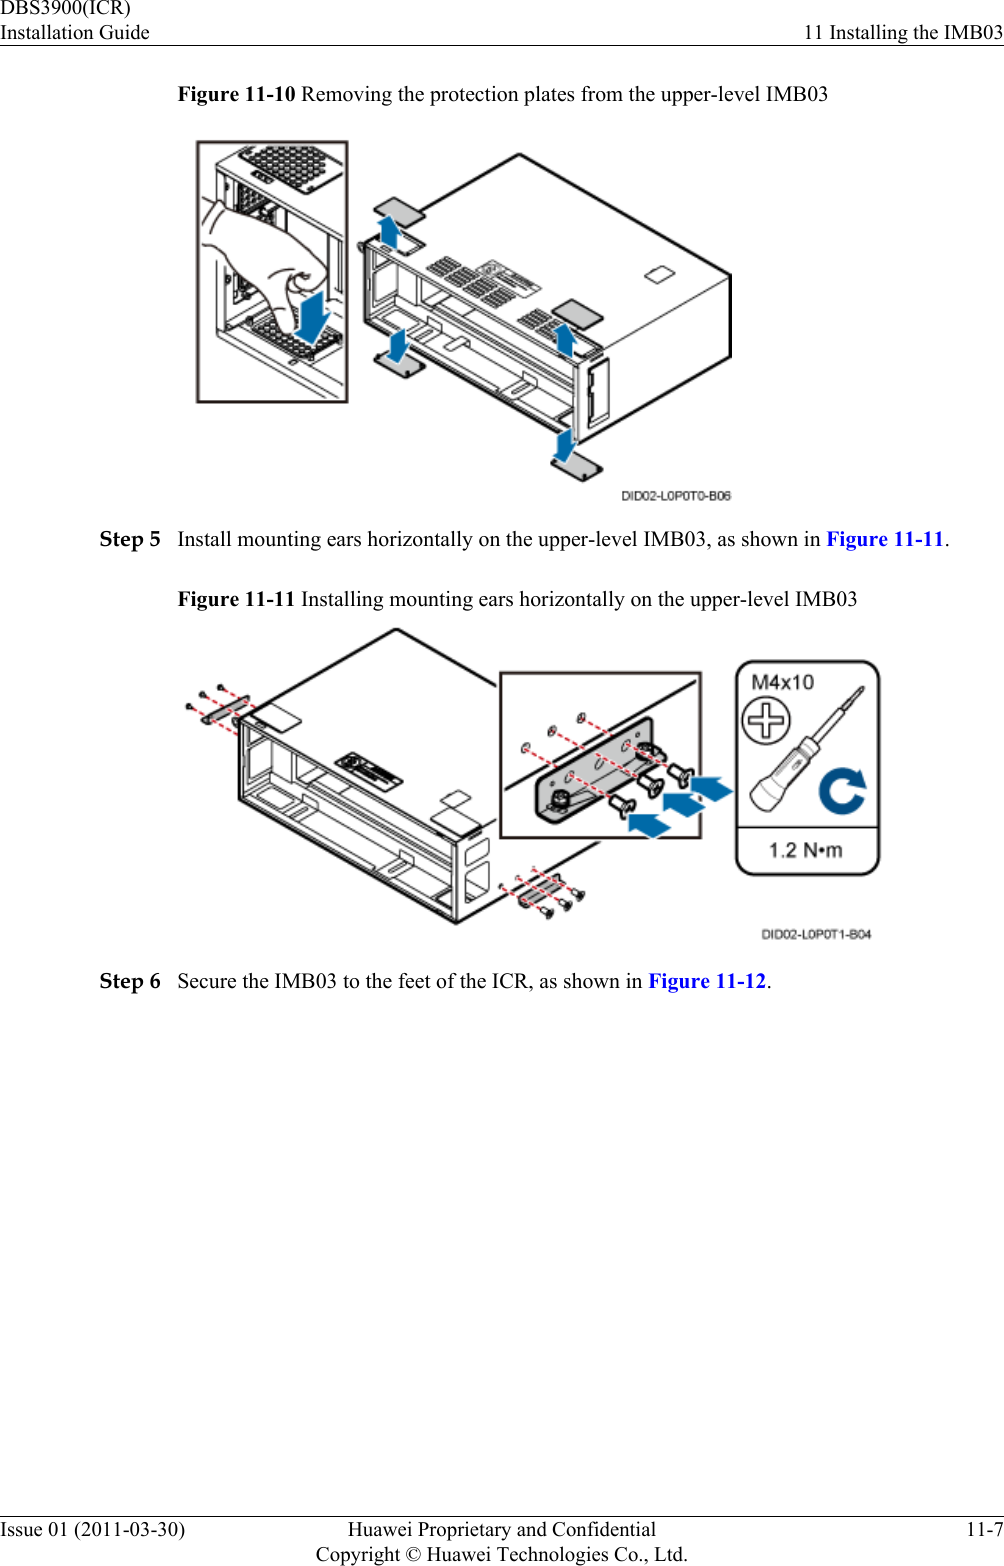 Figure 11-10 Removing the protection plates from the upper-level IMB03Step 5 Install mounting ears horizontally on the upper-level IMB03, as shown in Figure 11-11.Figure 11-11 Installing mounting ears horizontally on the upper-level IMB03Step 6 Secure the IMB03 to the feet of the ICR, as shown in Figure 11-12.DBS3900(ICR)Installation Guide 11 Installing the IMB03Issue 01 (2011-03-30) Huawei Proprietary and ConfidentialCopyright © Huawei Technologies Co., Ltd.11-7